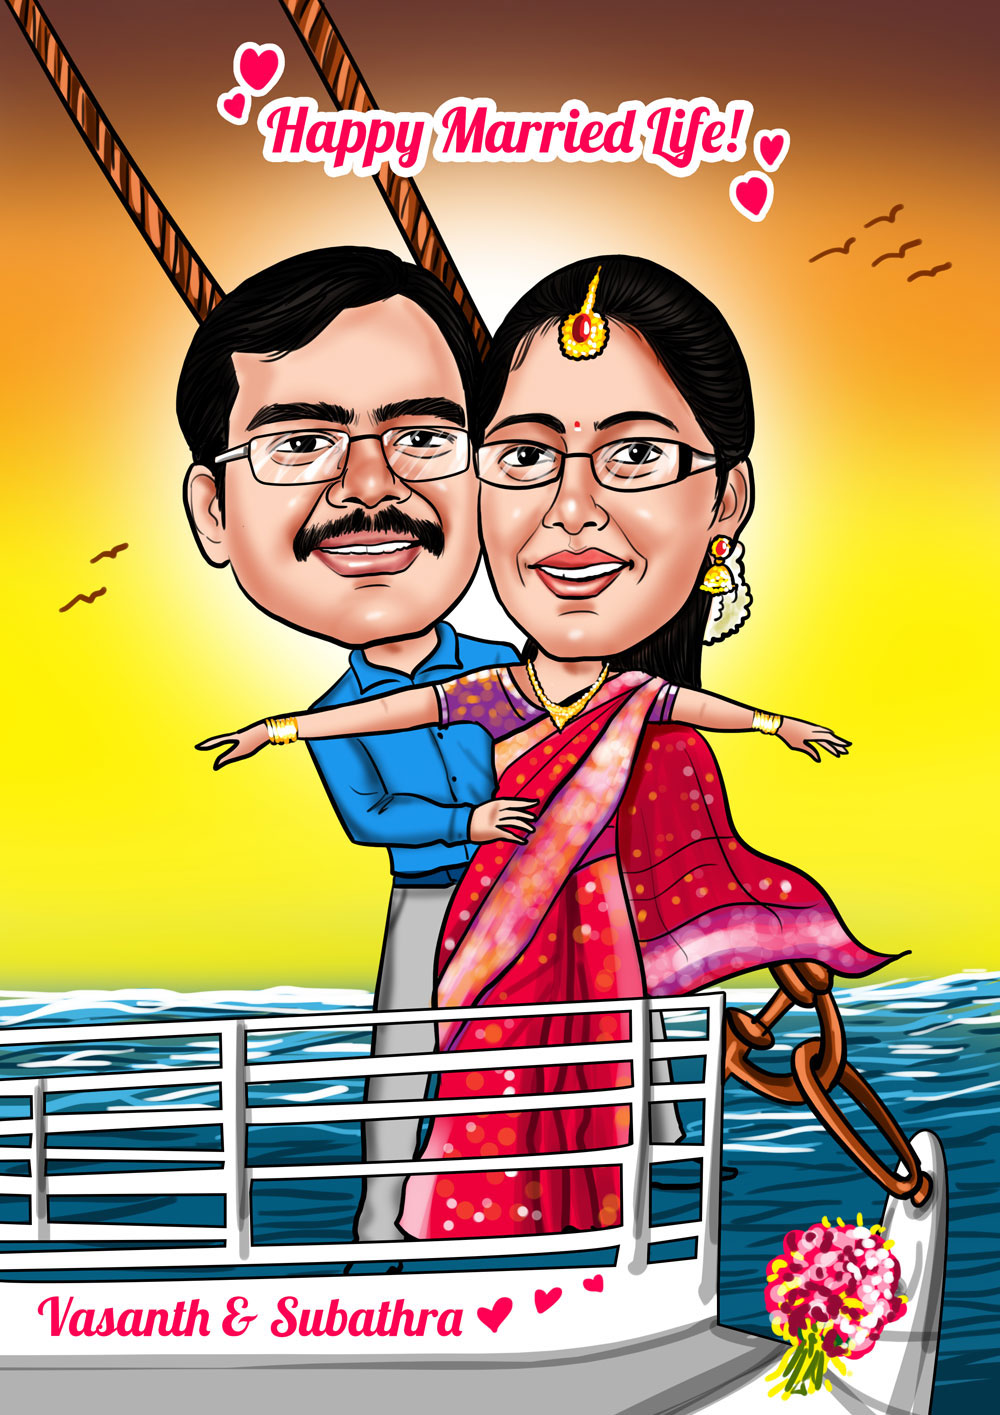 Indian Wedding Caricature Card Designs on Behance